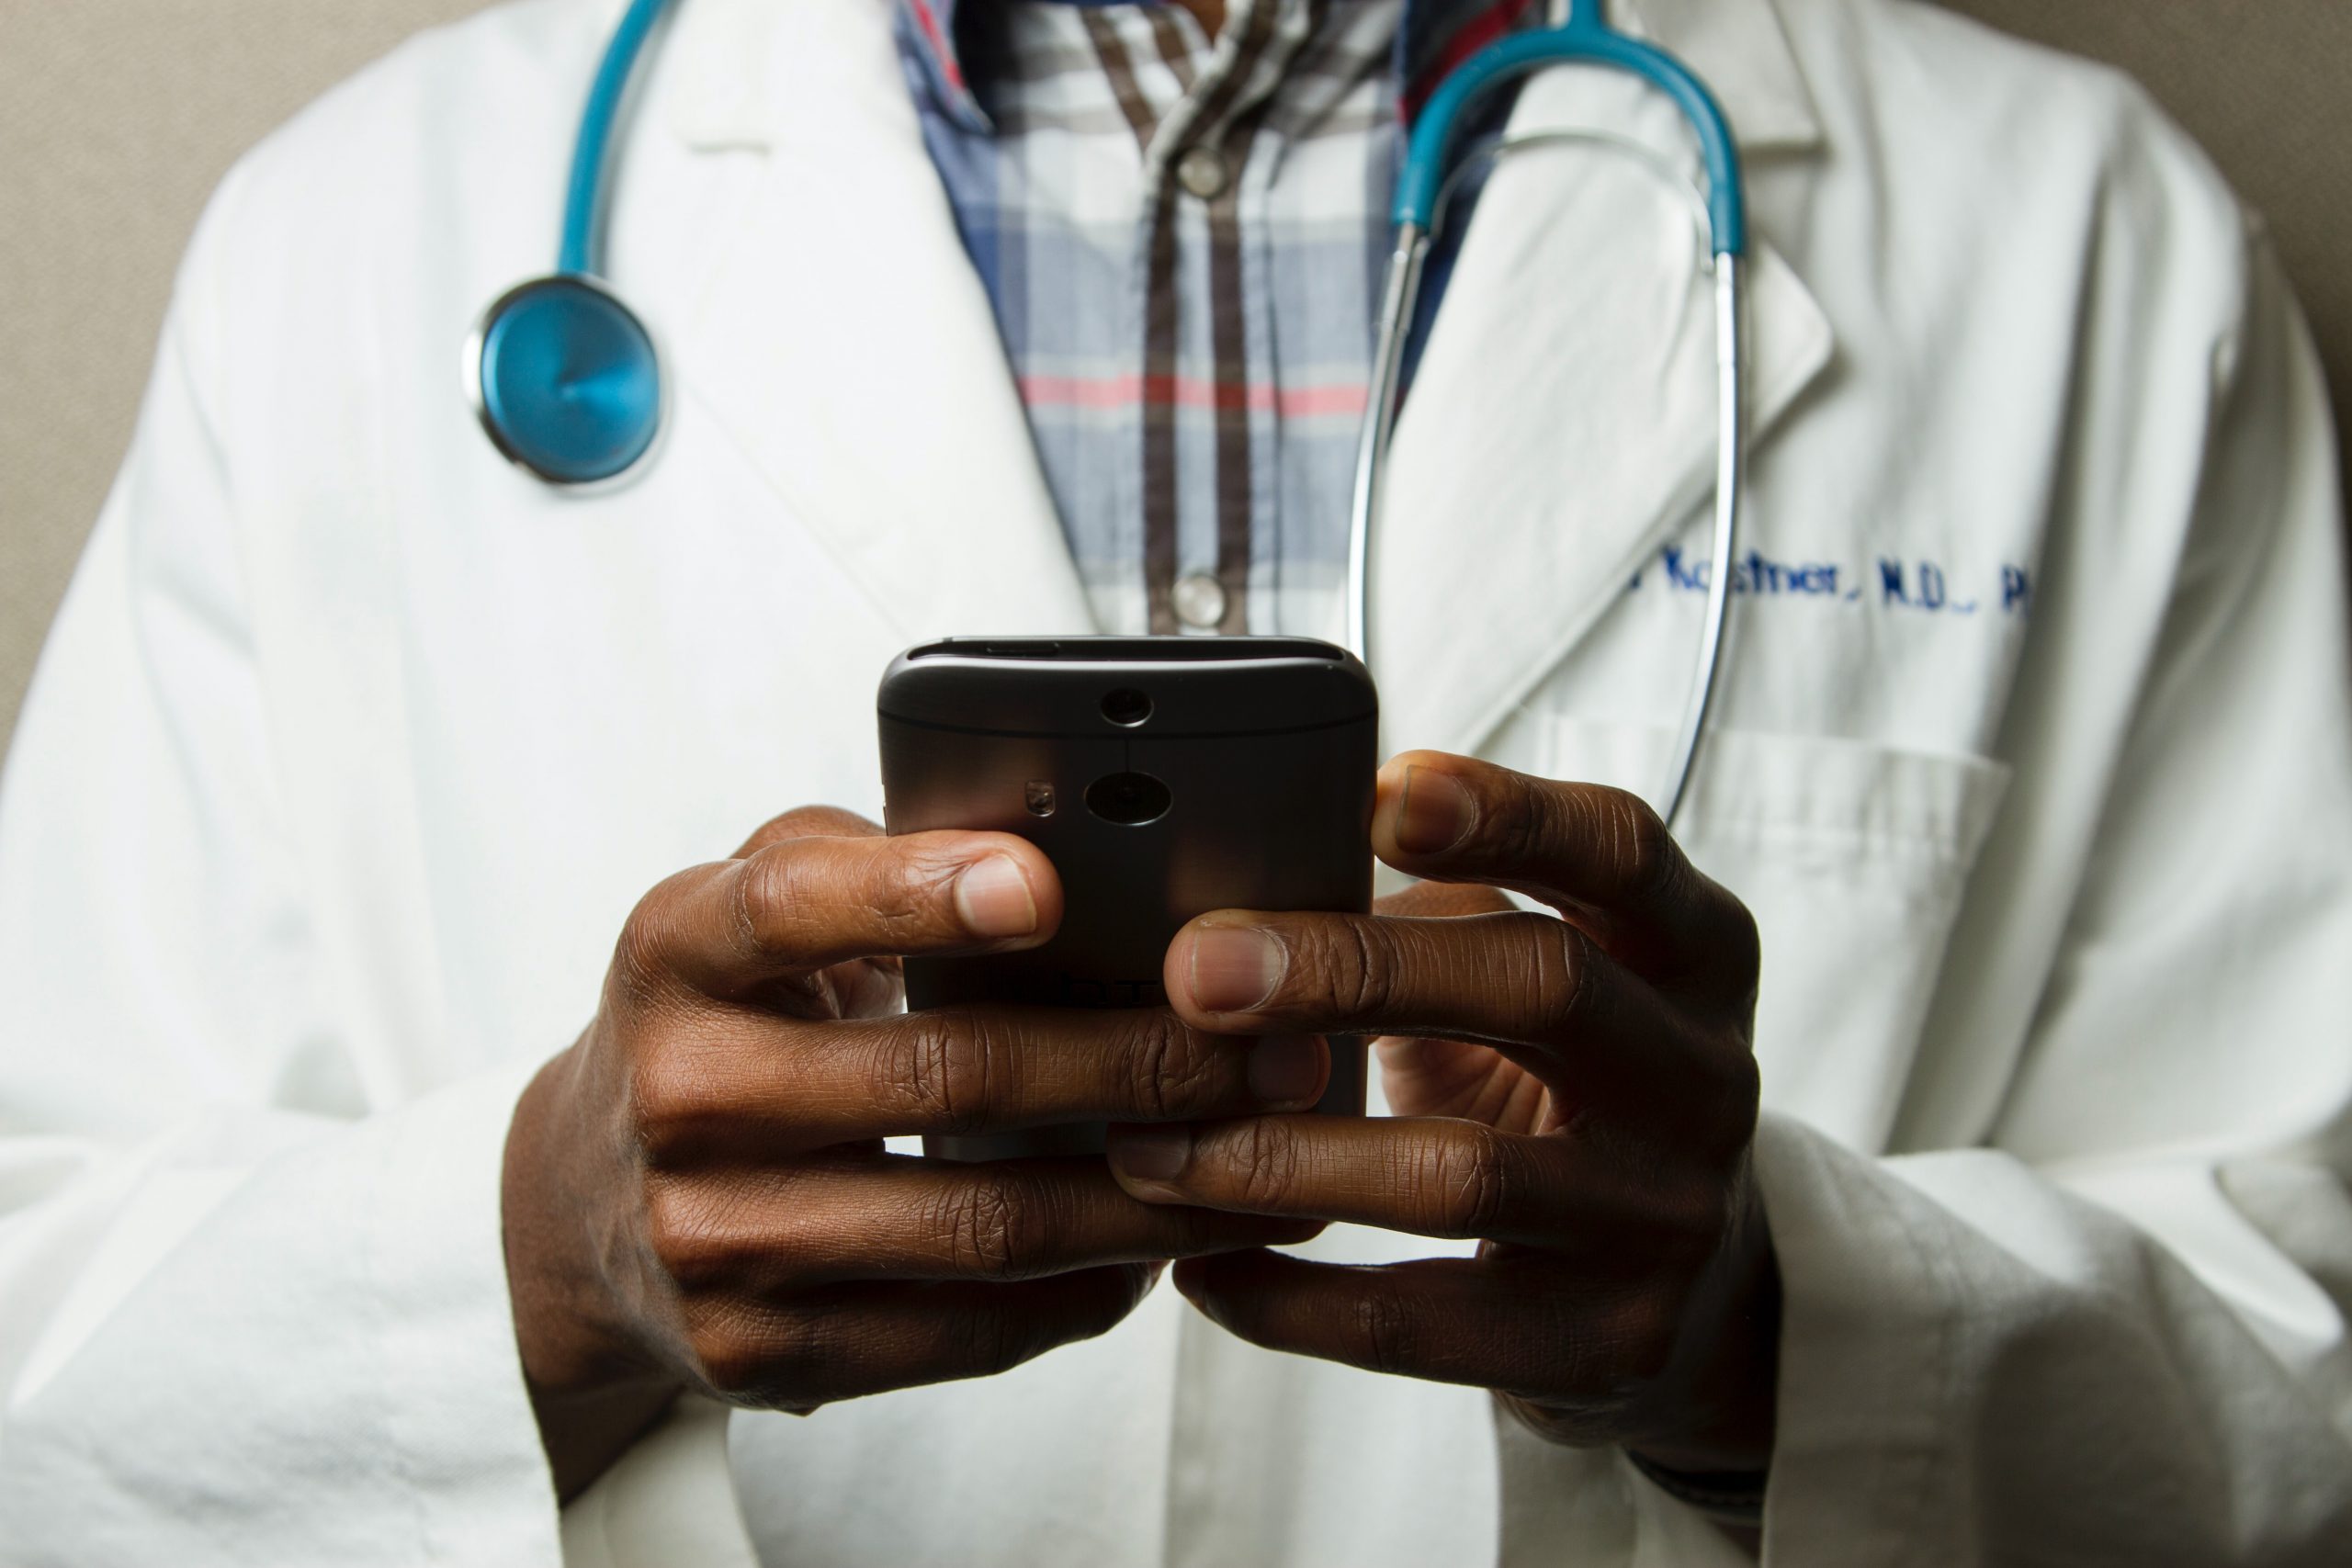 Person in white coat with stethoscope holding cell phone